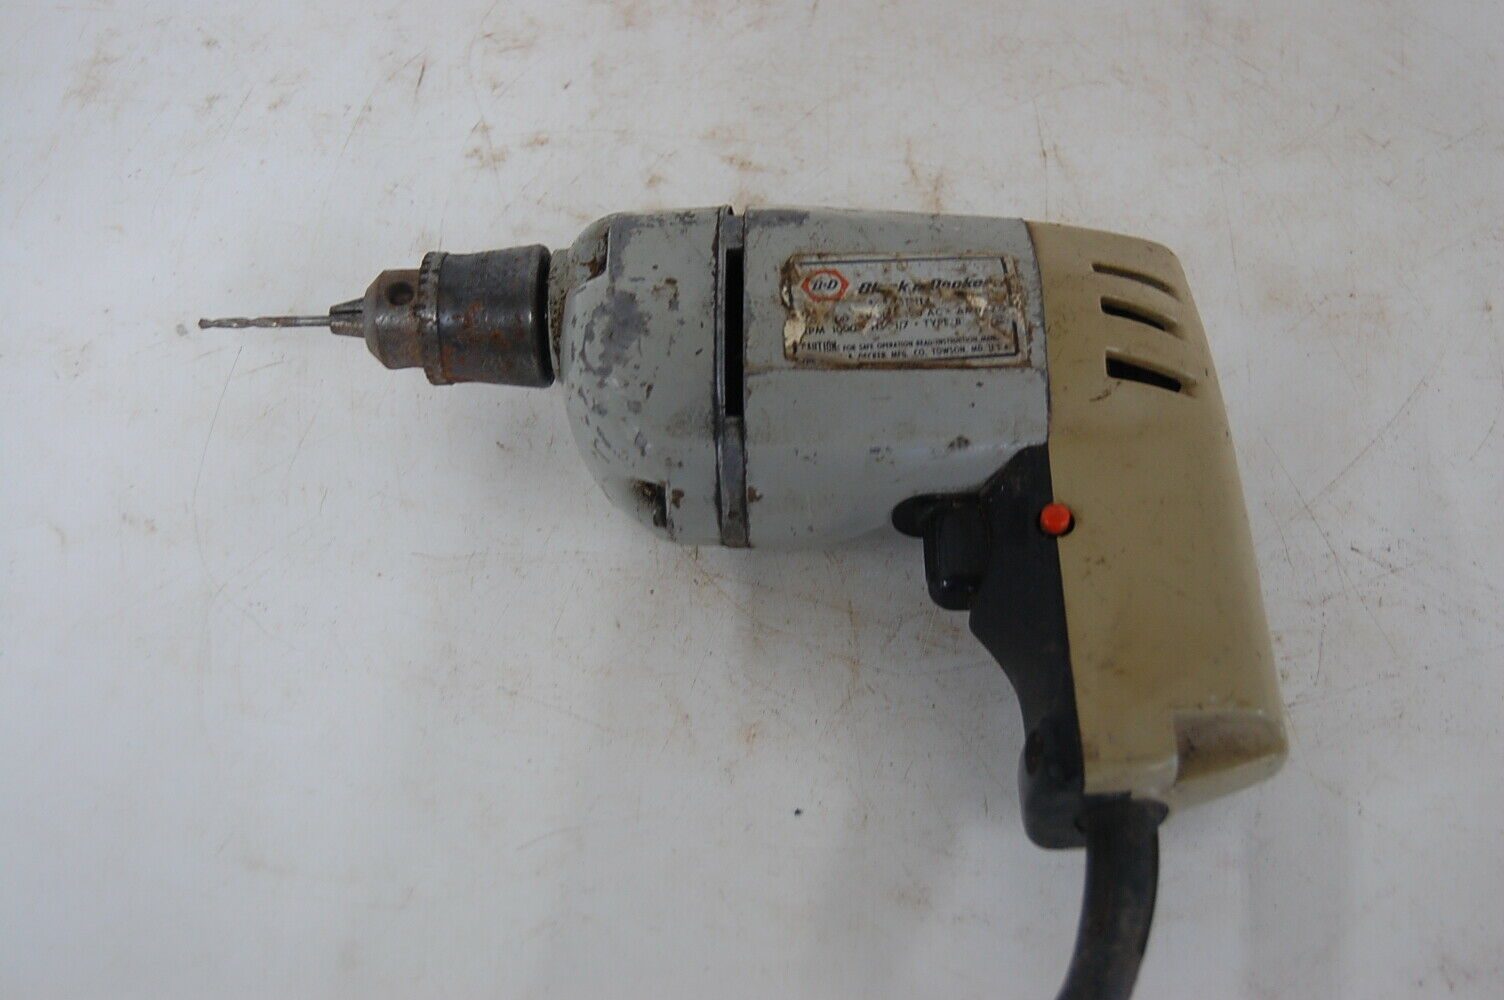 Vintage Black and Decker 3/8 Variable Speed Drill W/ Sanding Pad